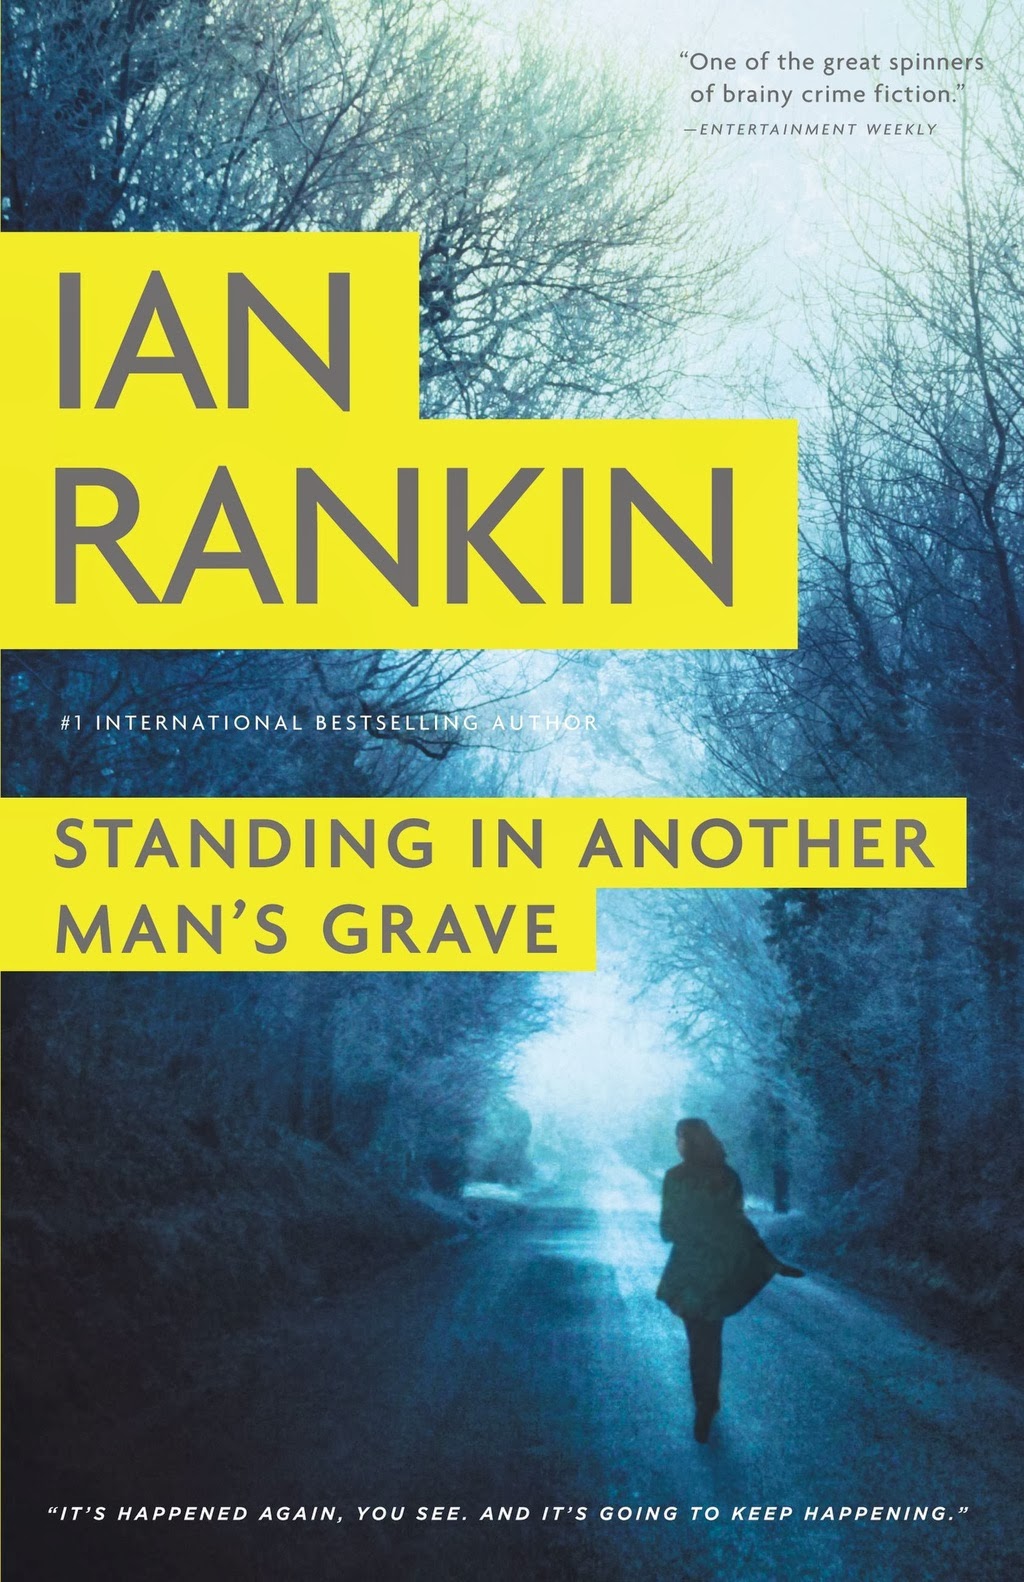 http://discover.halifaxpubliclibraries.ca/?q=title:standing%20in%20another%20man%27s%20grave